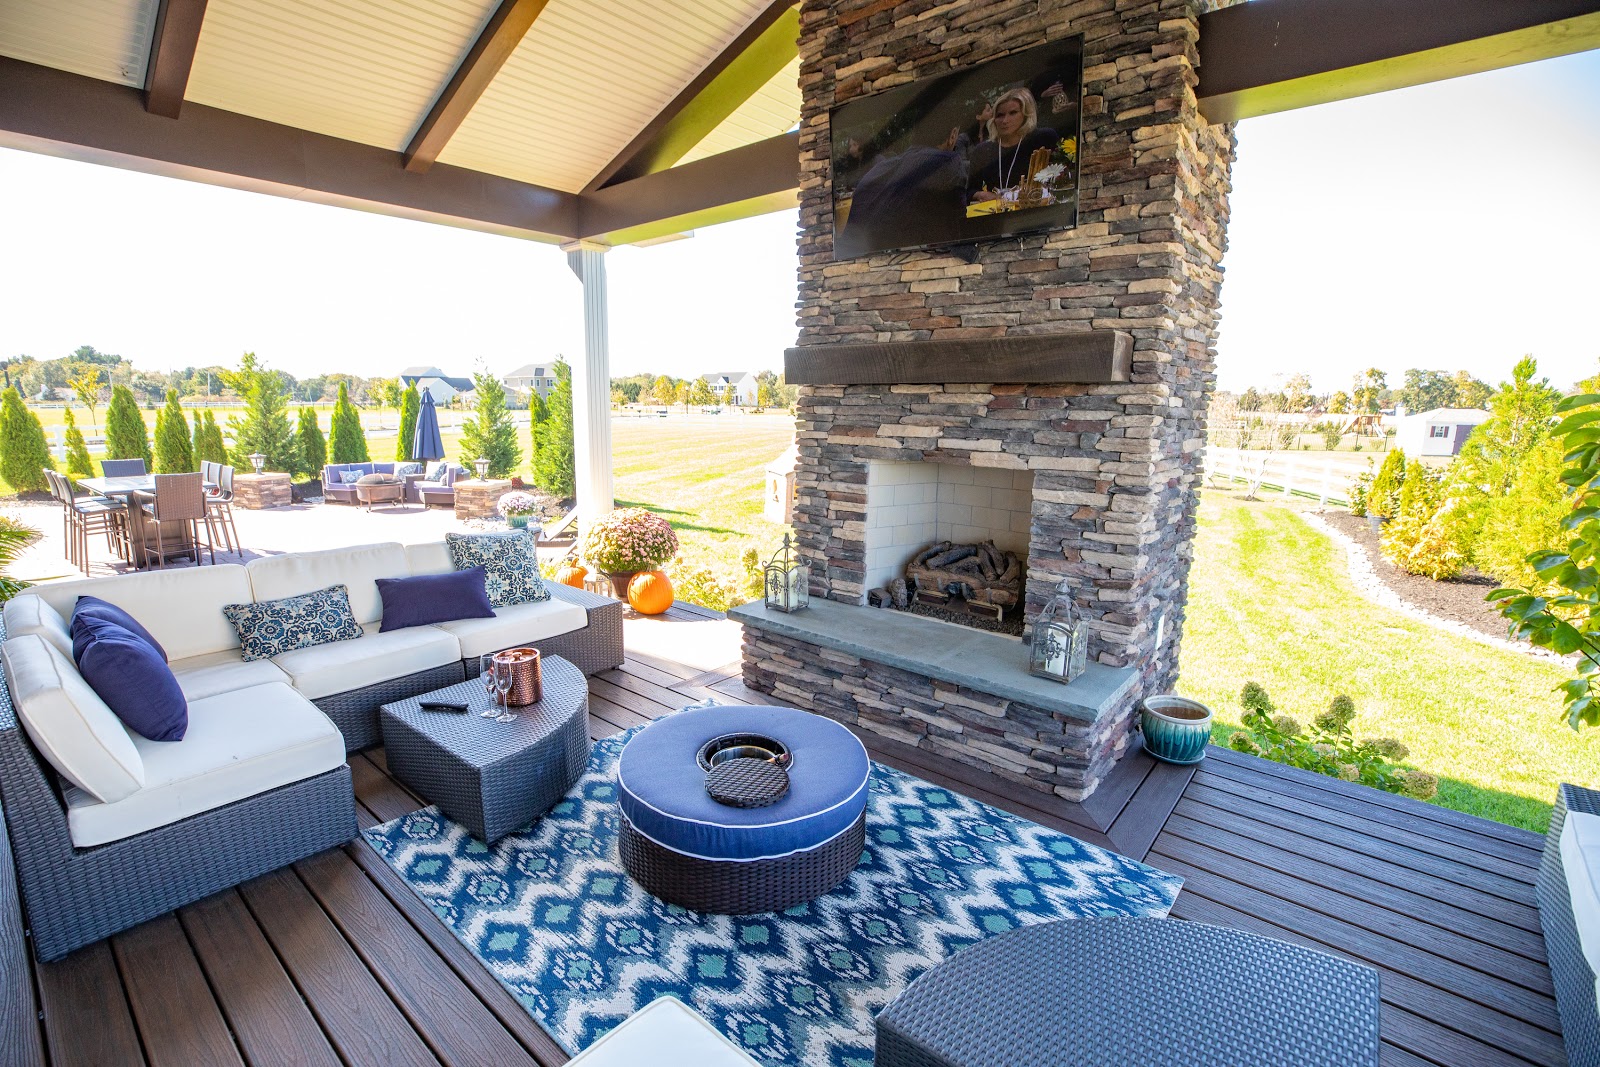 A backyard, wide-planked patio with stone-faced fireplace, blue-patterned rug, couch, and firepit surrounded with green landscape.